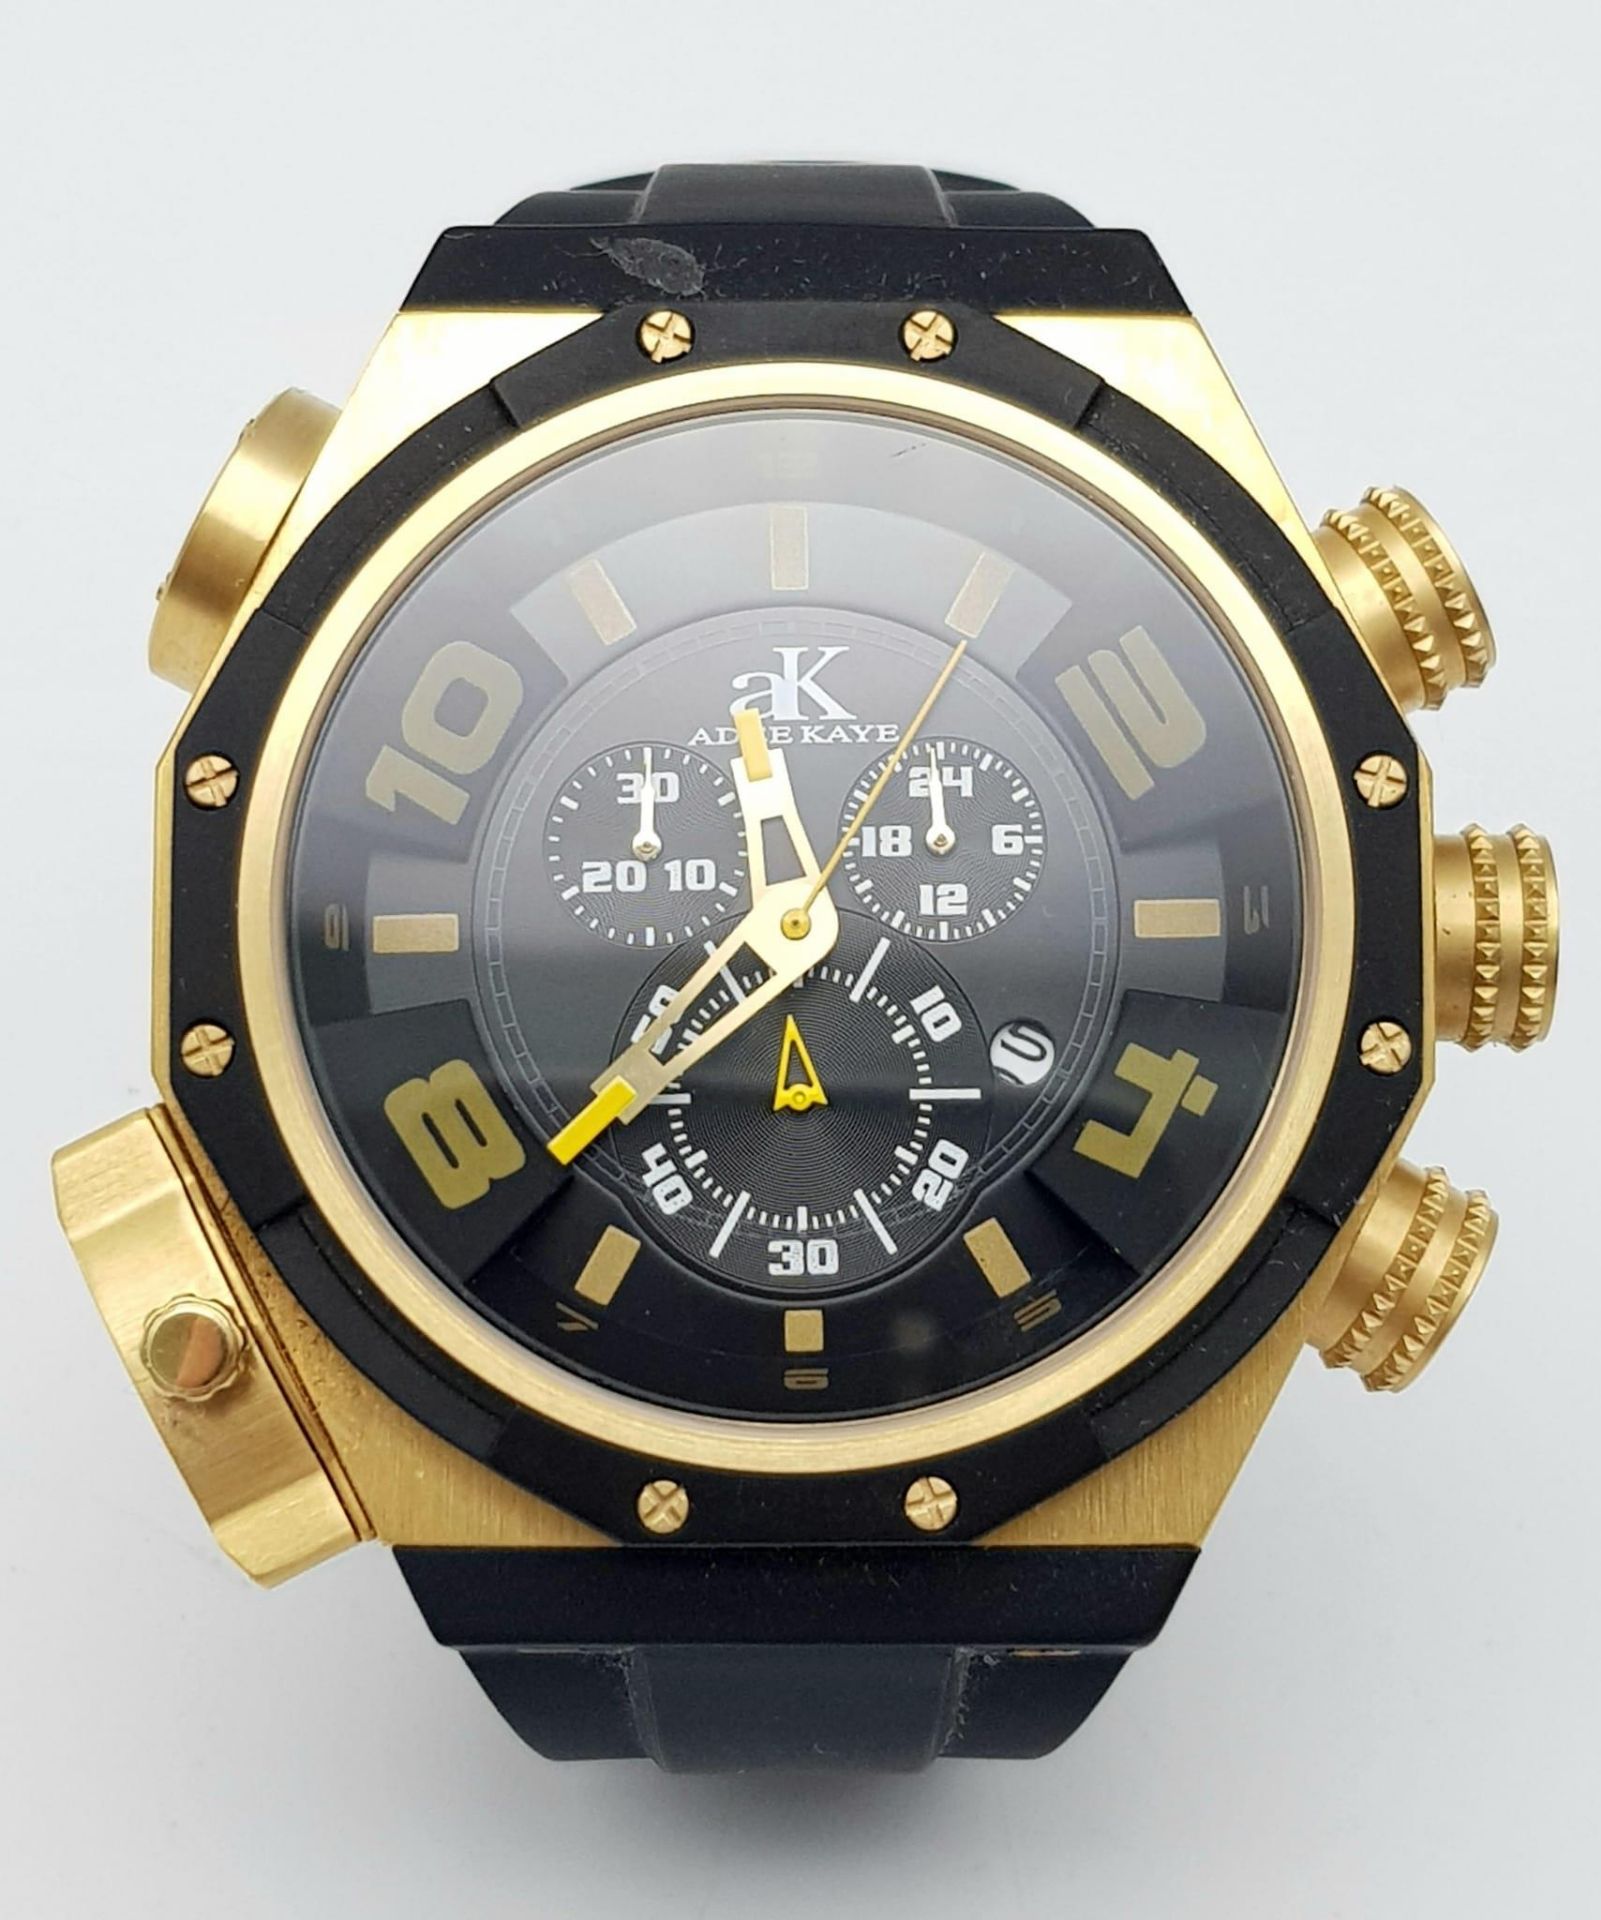 An Unworn Limited Edition Run Adee Kaye, Beverley Hills, Oversize Sports Chronograph. 65mm Including - Image 2 of 7